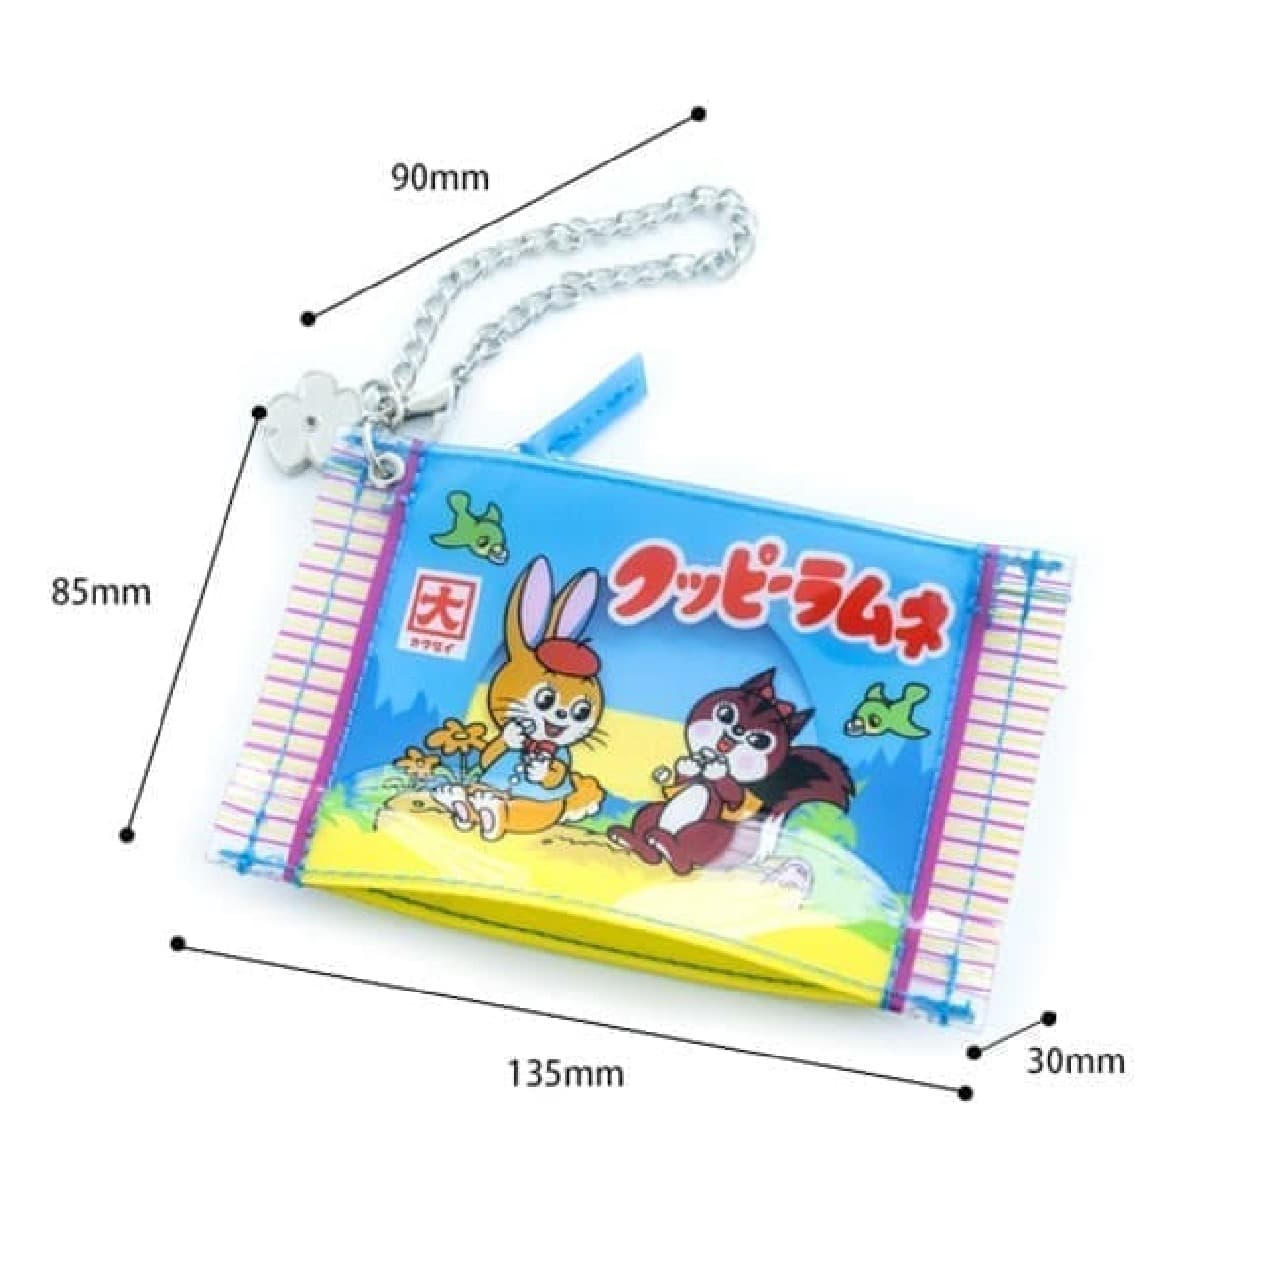 New goods of "Kuppi Ramune" in Villevan --Pouches and pass cases that can be used every day